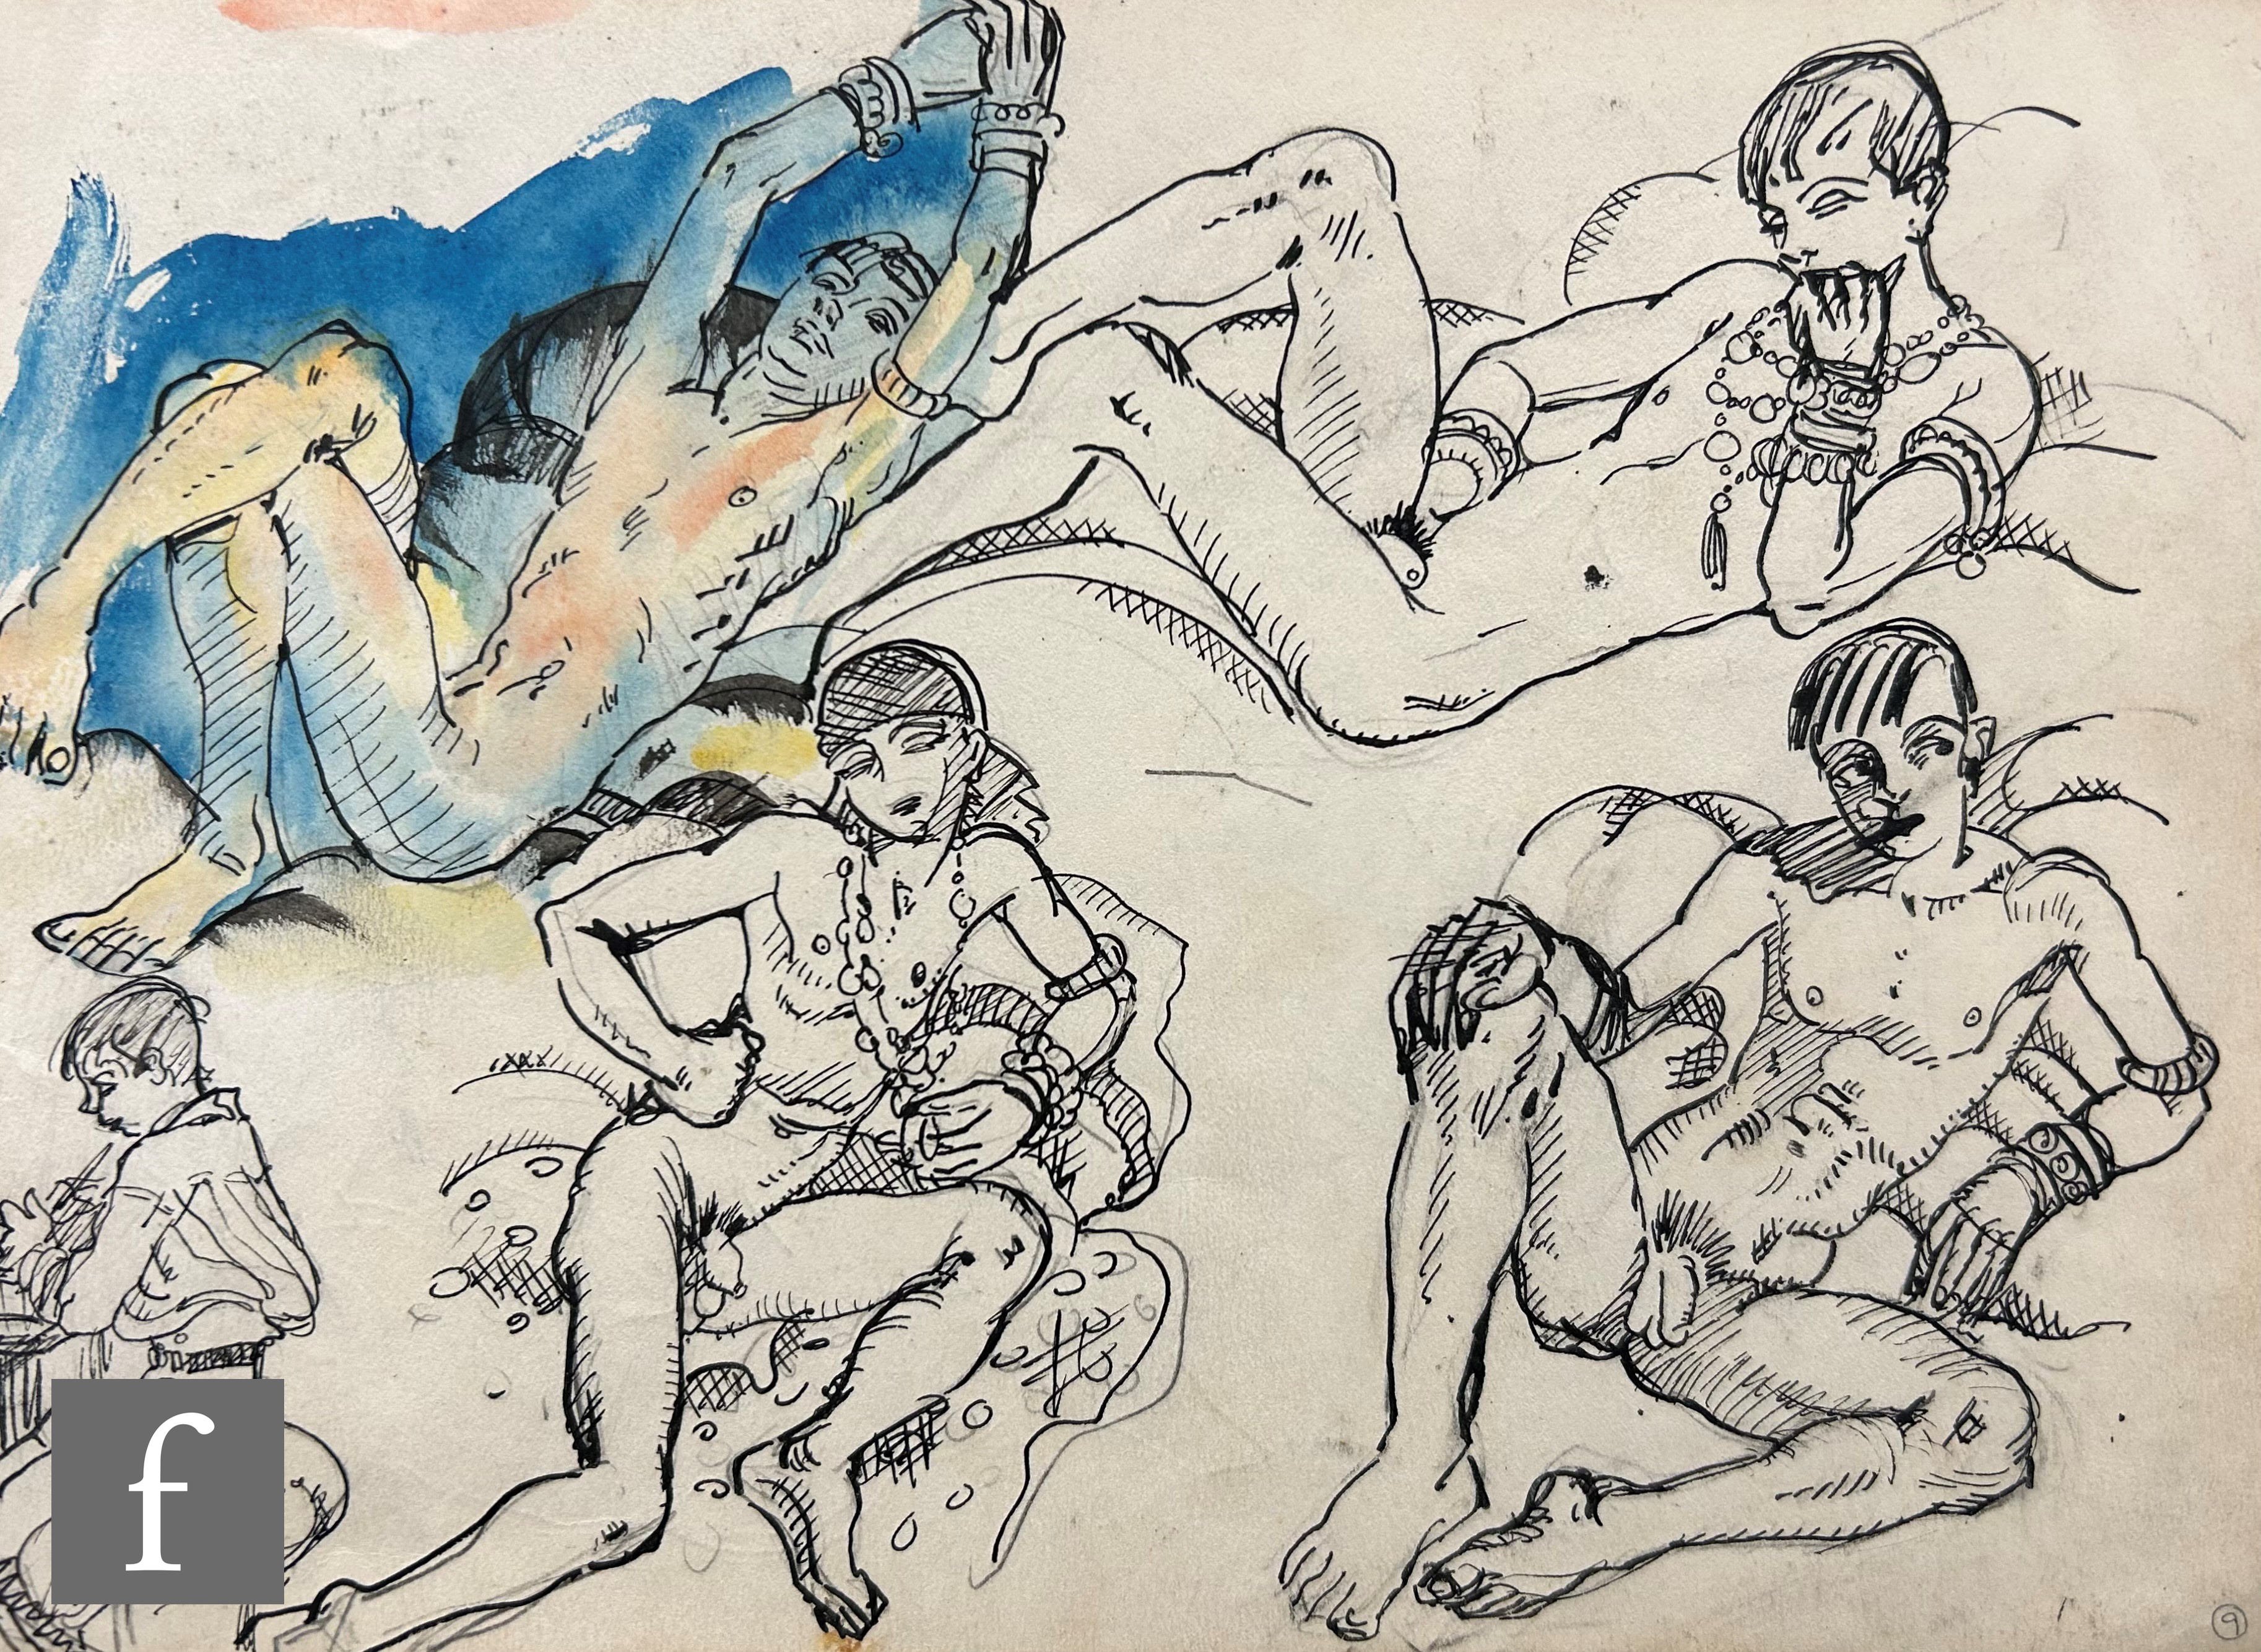 Albert Wainwright (1898-1943) - A sketch depicting multiple nude male figures in various reclining